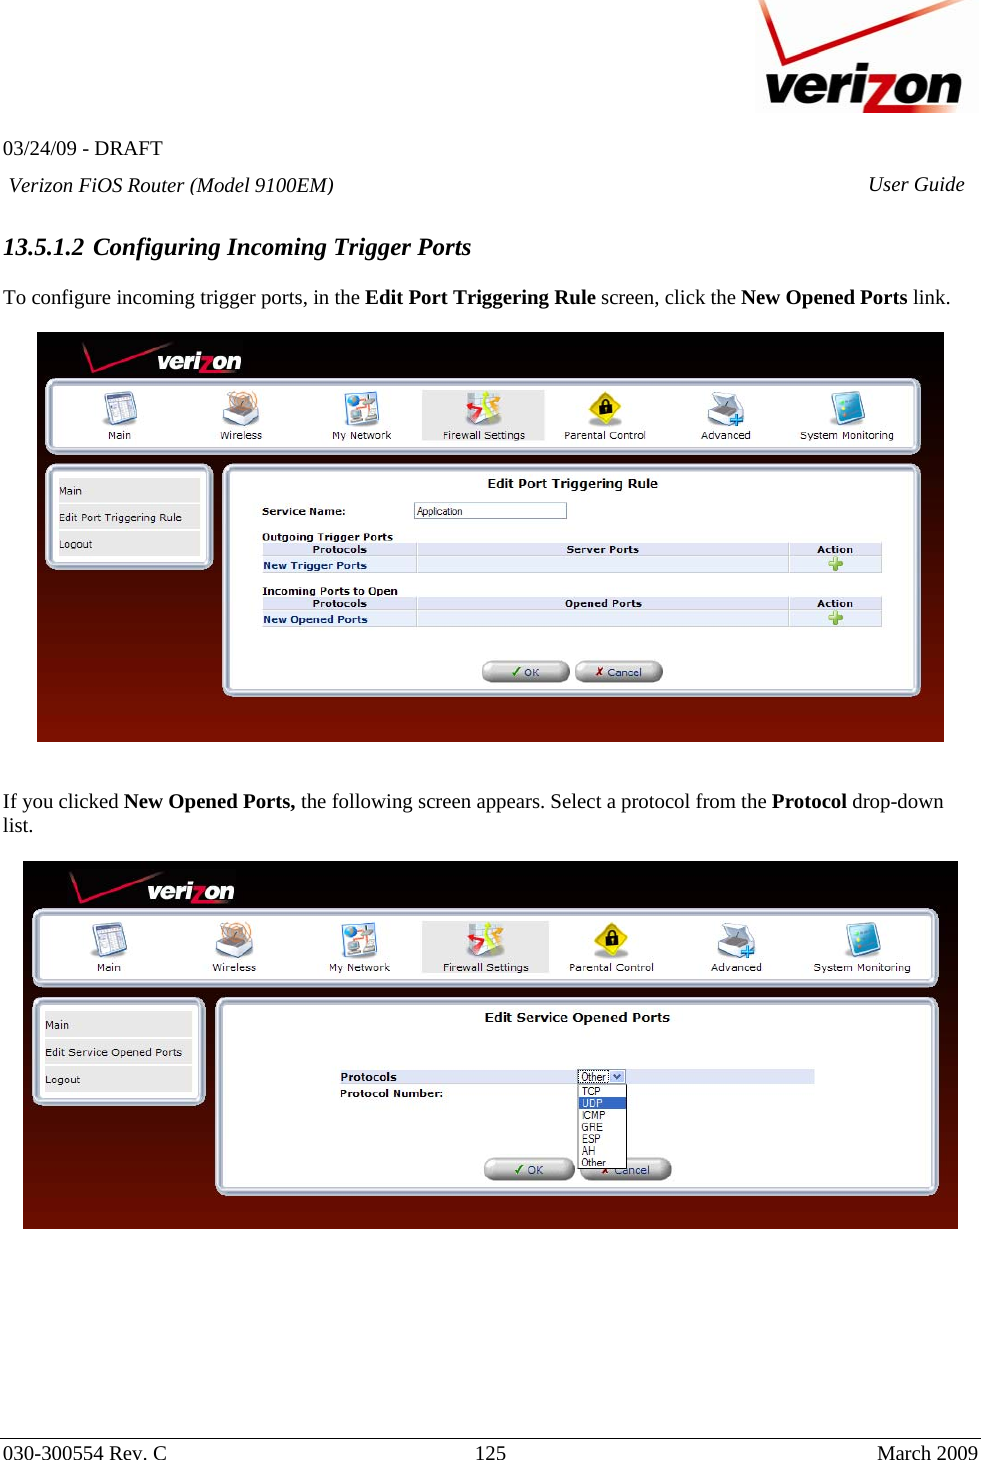   03/24/09 - DRAFT   030-300554 Rev. C  125      March 2009  Verizon FiOS Router (Model 9100EM) User Guide 13.5.1.2 Configuring Incoming Trigger Ports  To configure incoming trigger ports, in the Edit Port Triggering Rule screen, click the New Opened Ports link.      If you clicked New Opened Ports, the following screen appears. Select a protocol from the Protocol drop-down list.           